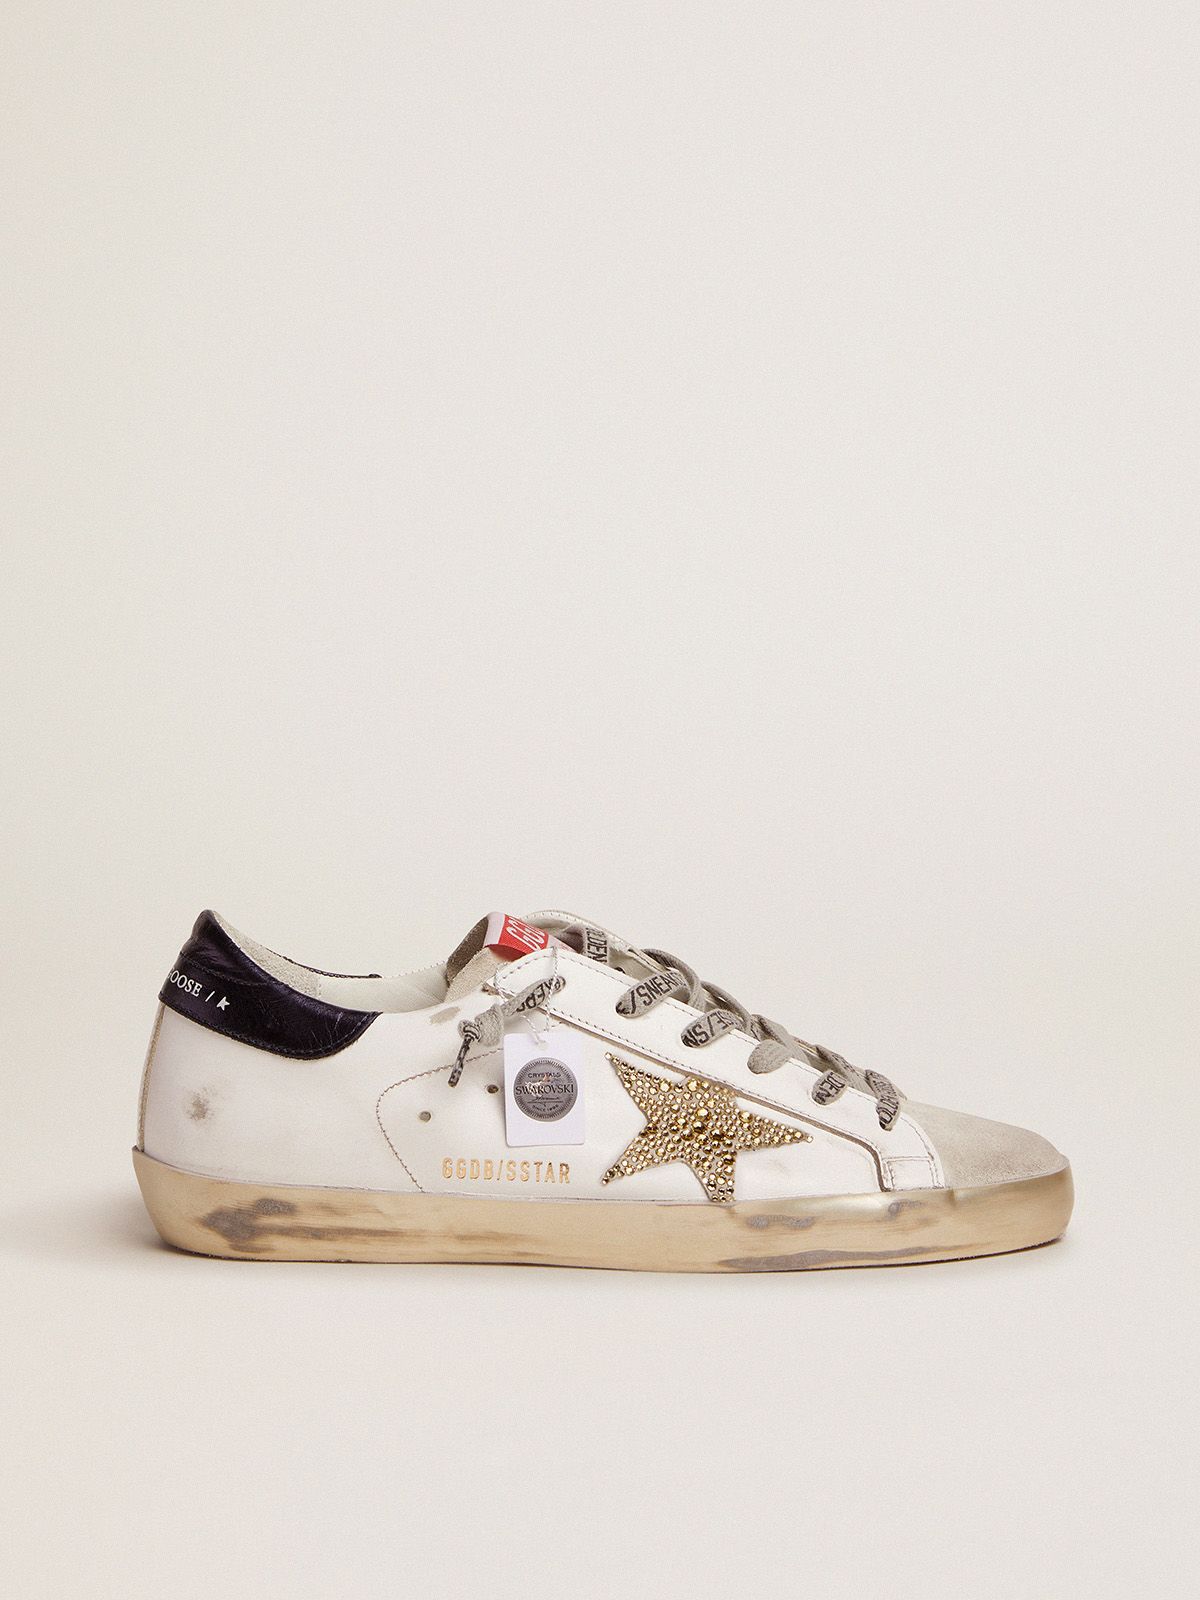 golden goose Swarovski crystal Super-Star and heel LTD navy-blue leather sneakers laminated star with tab